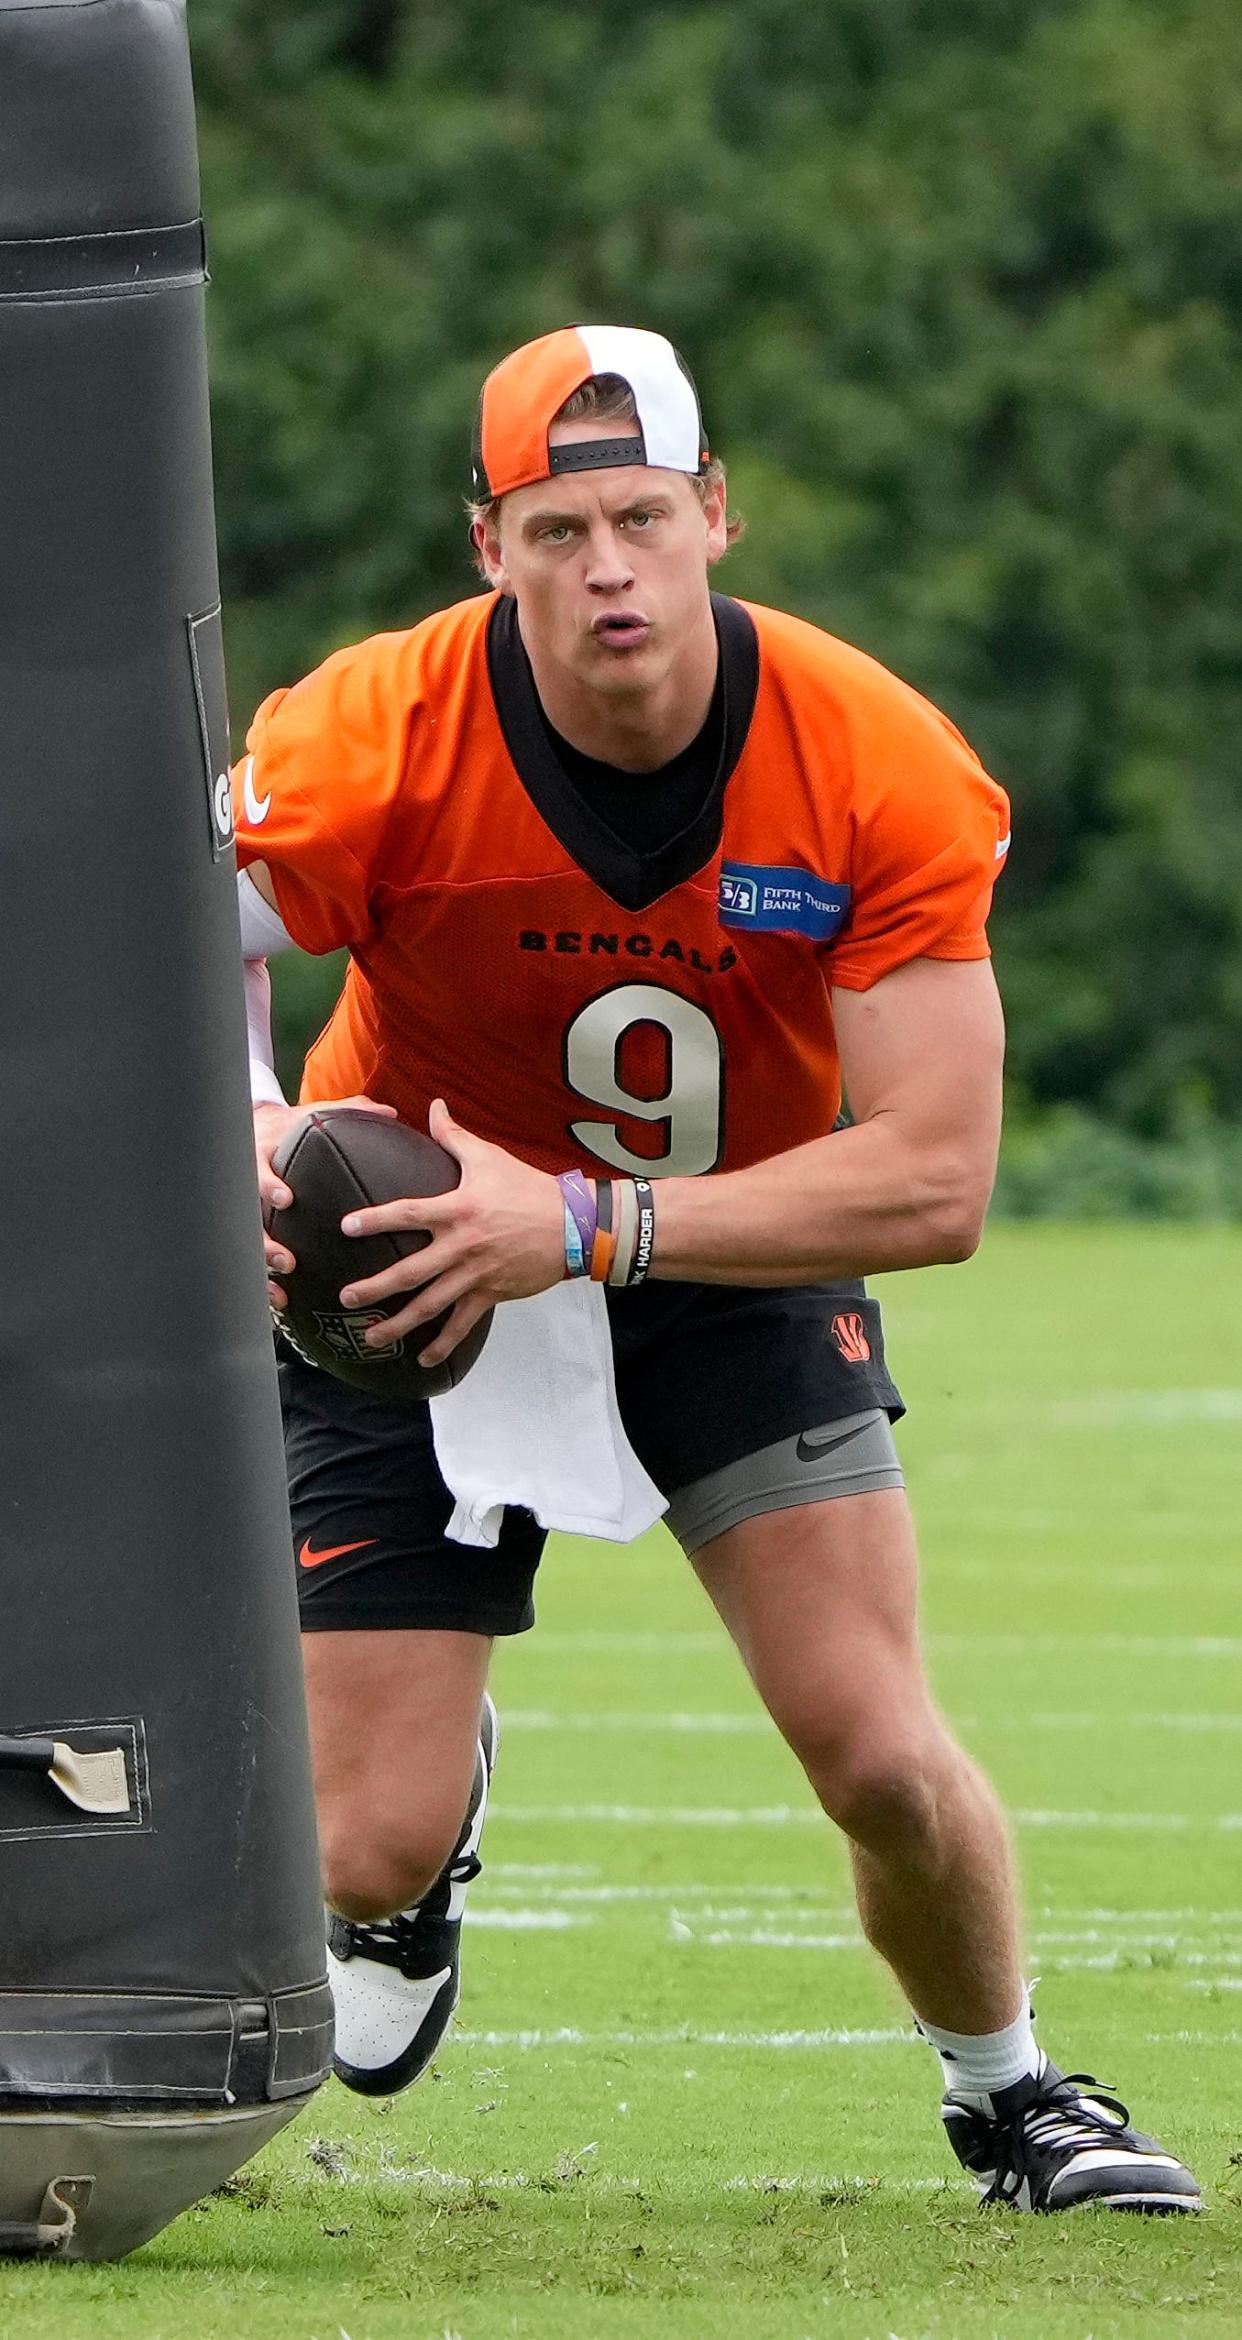 Bengals quarterback Joe Burrow, who is recovering from wrist surgery, told reporters this week that he is "addicted to getting better" as a player.